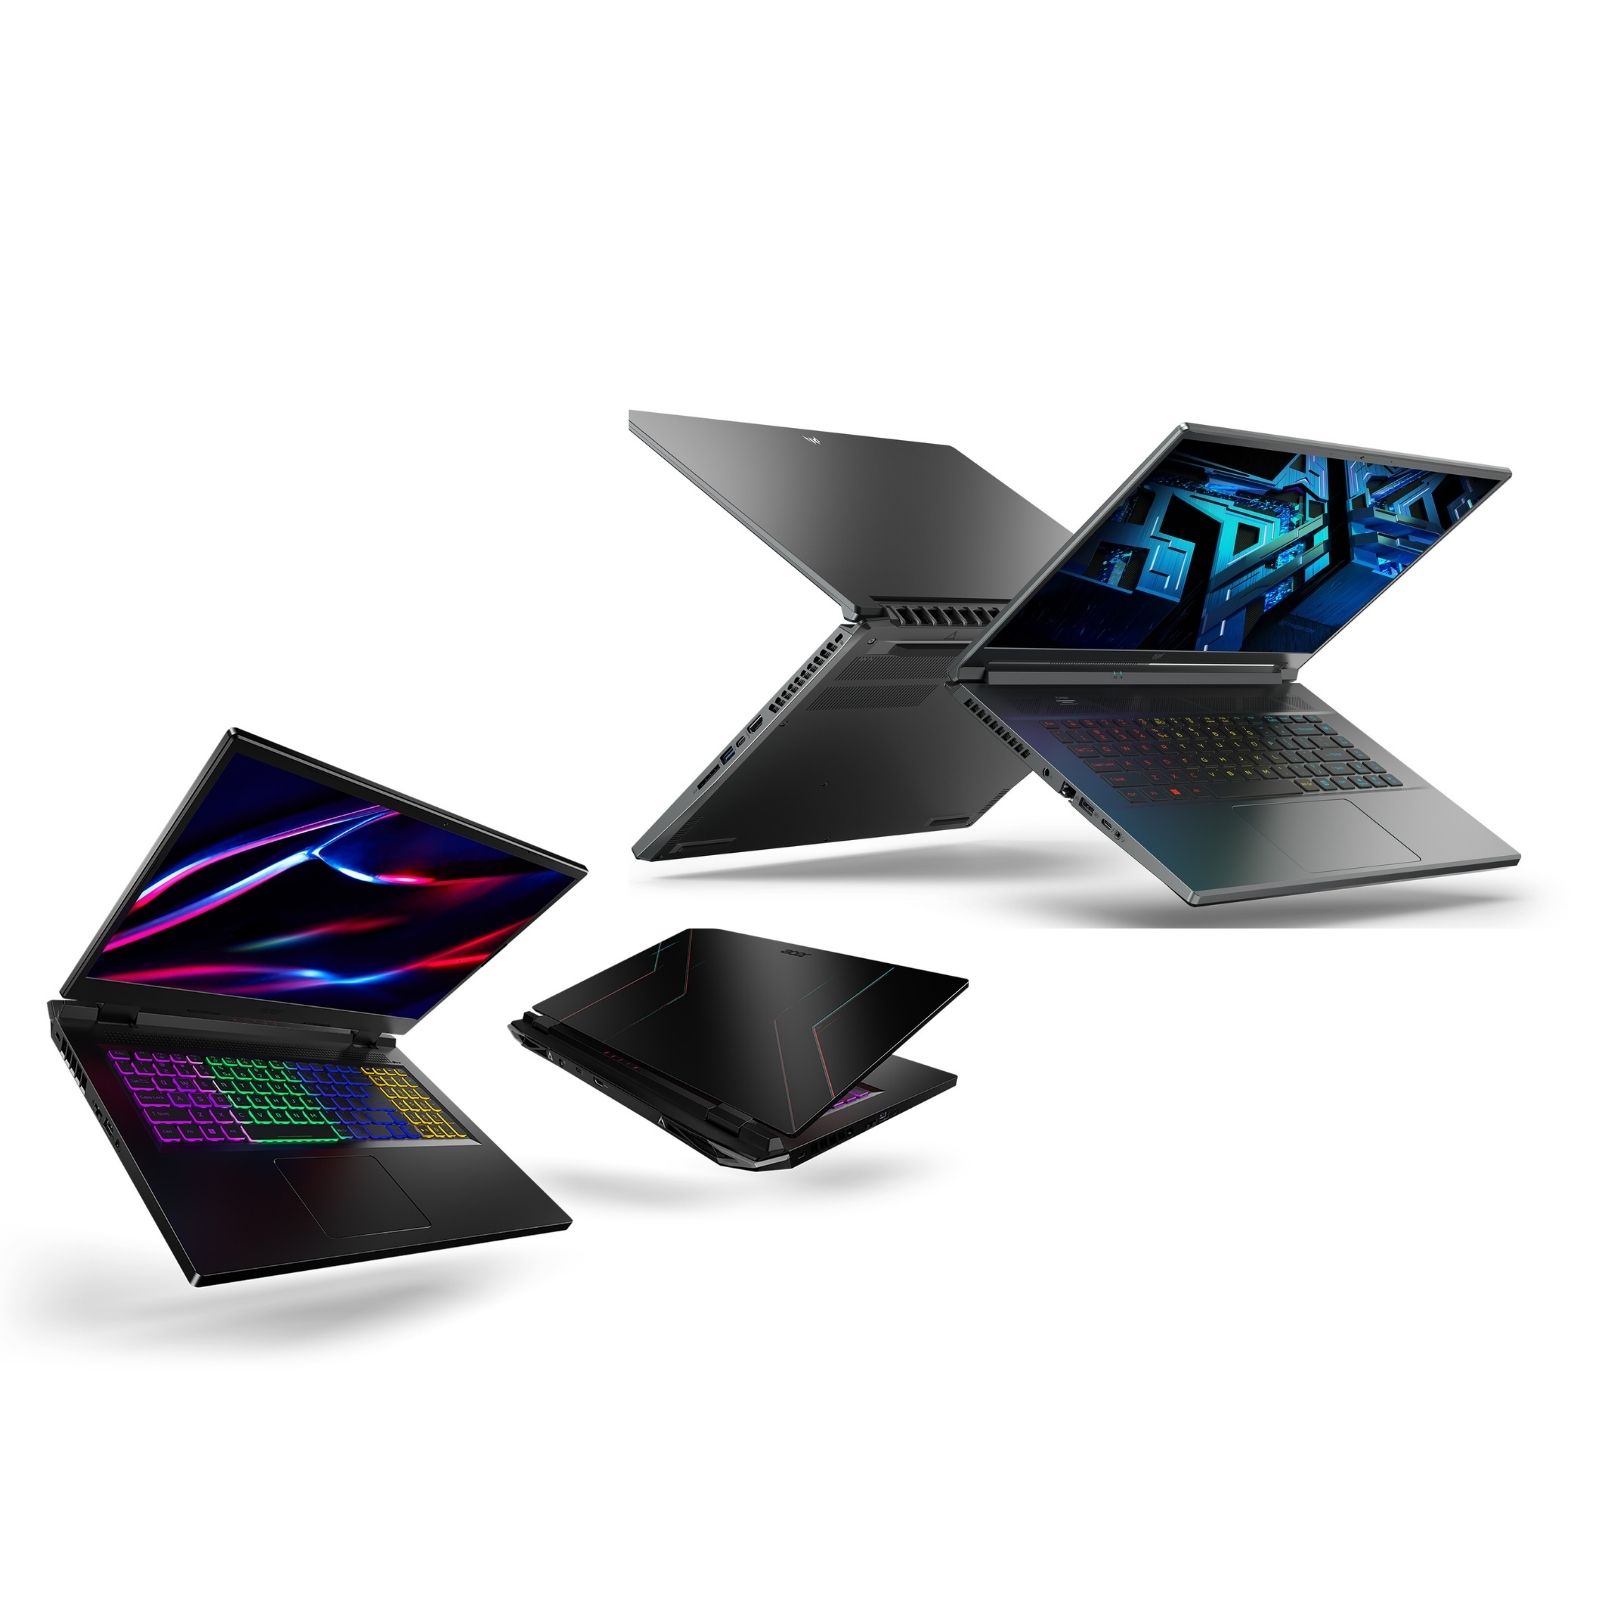 acer laptop png